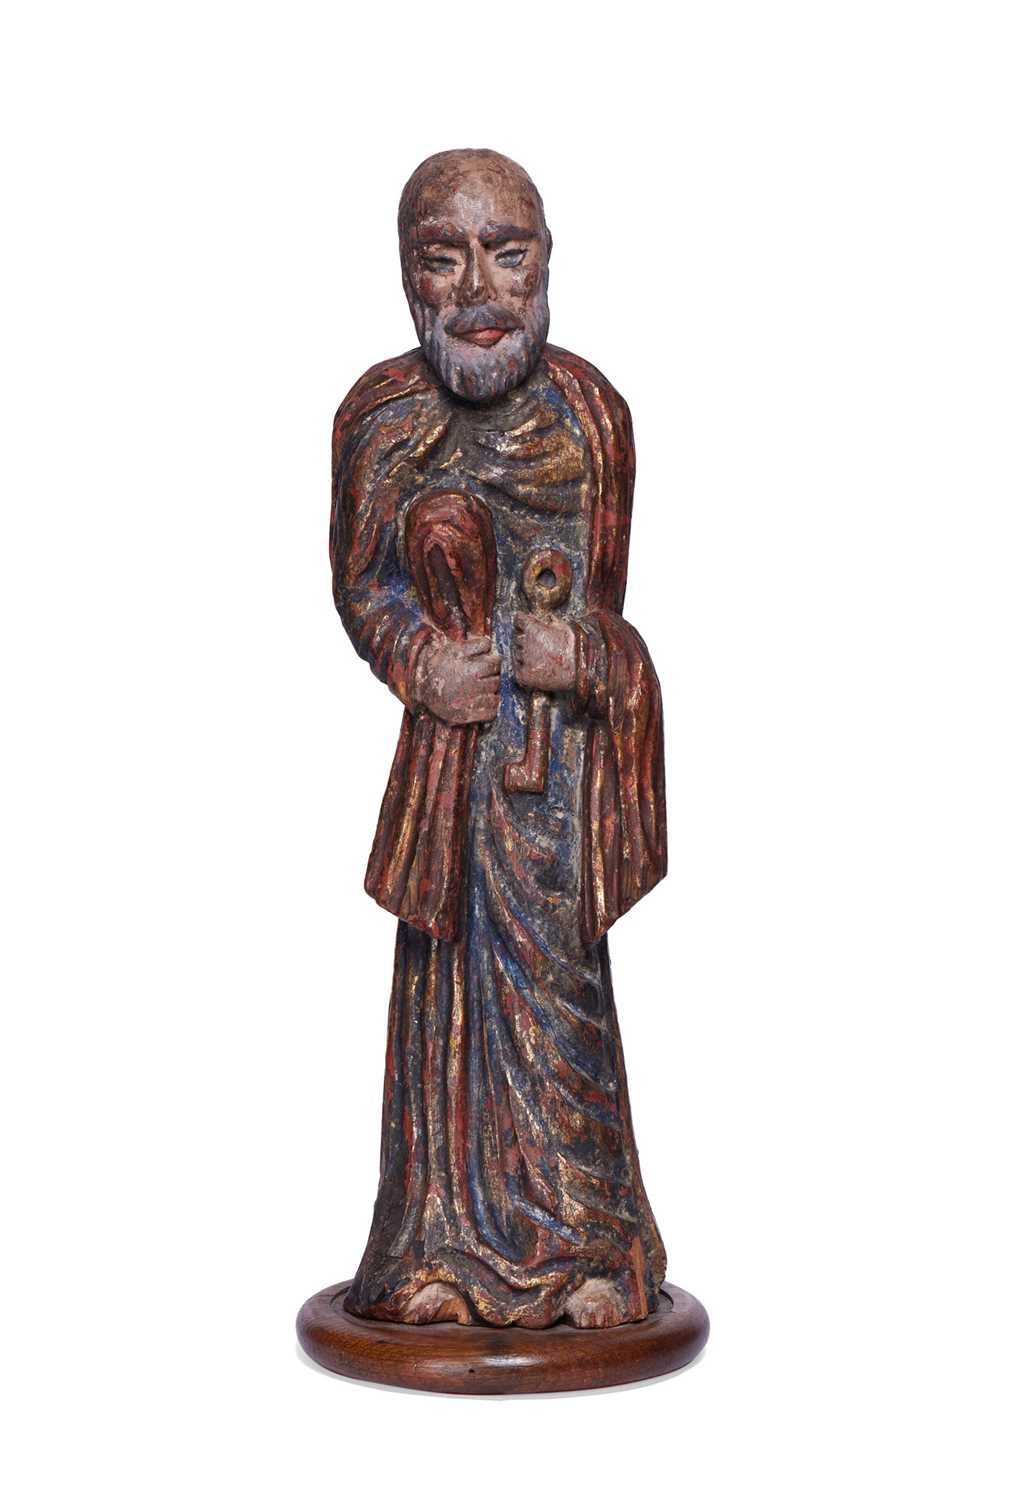 AN 18TH / 19TH CENTURY SPANISH COLONIAL PARCEL GILT FIGURE OF ST PETER